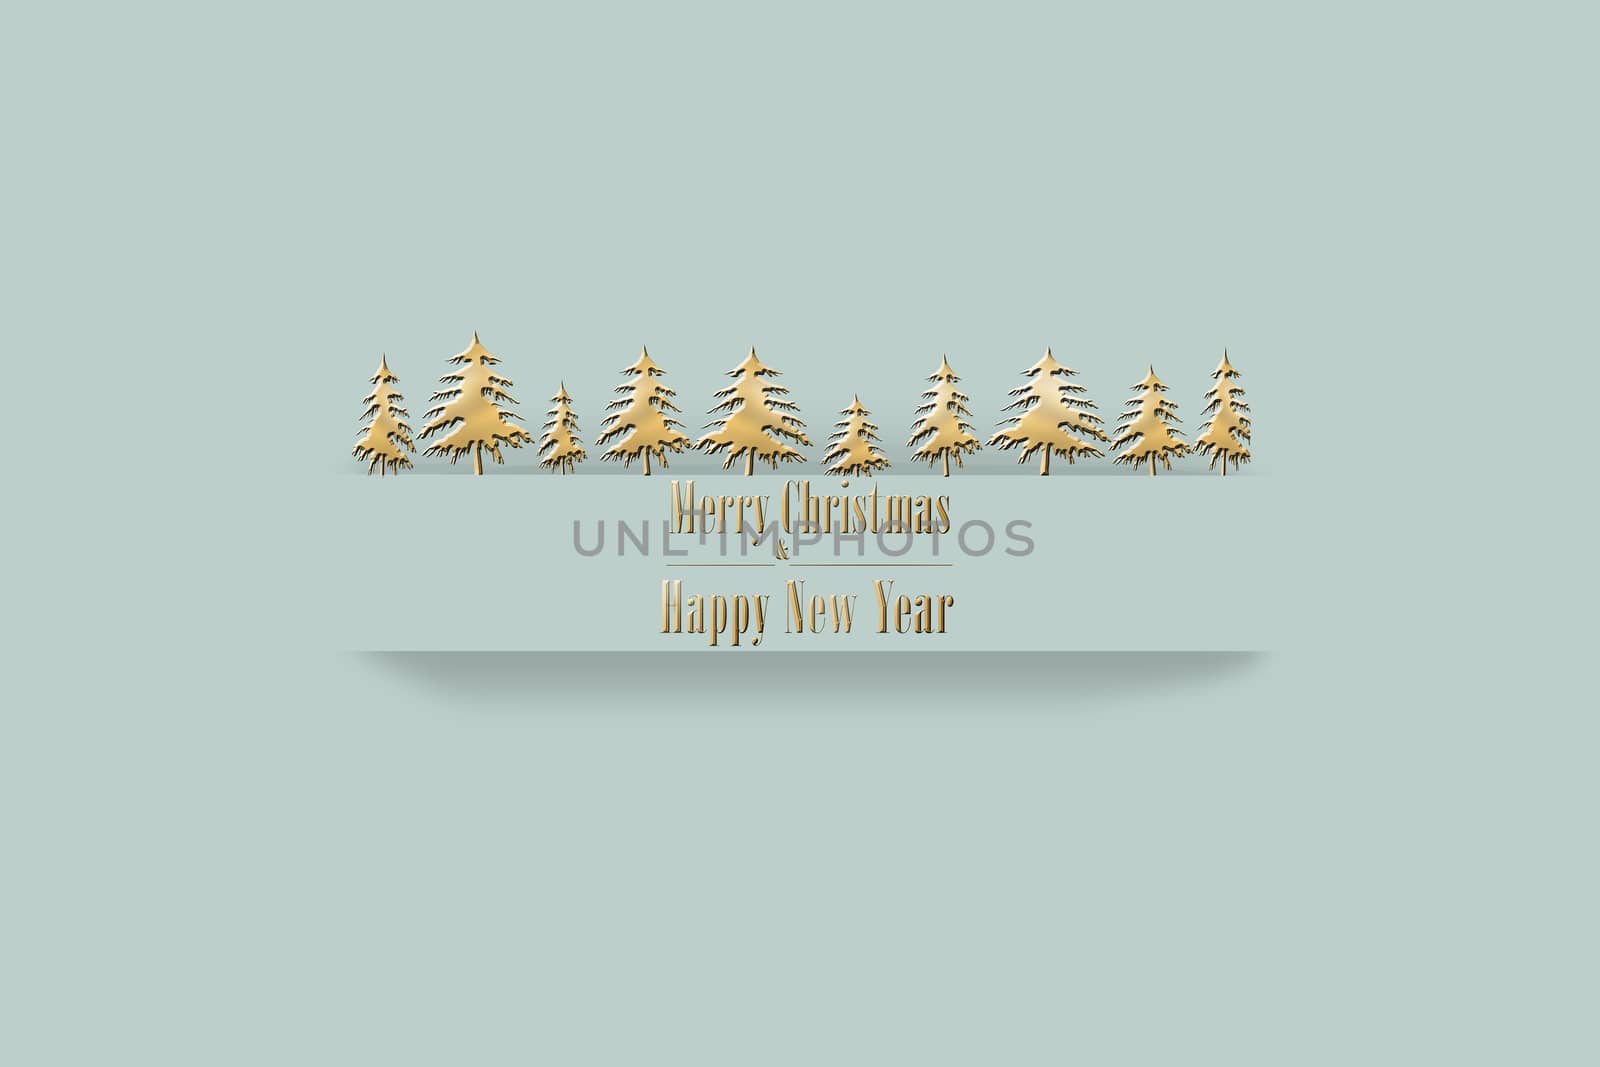 Elegant luxury 2021 Merry Christmas Happy New Year card in pastel green colour with gold Chrisytmas tress, and shiny text Merry Christmas and Happy New Year. 3D Illustration